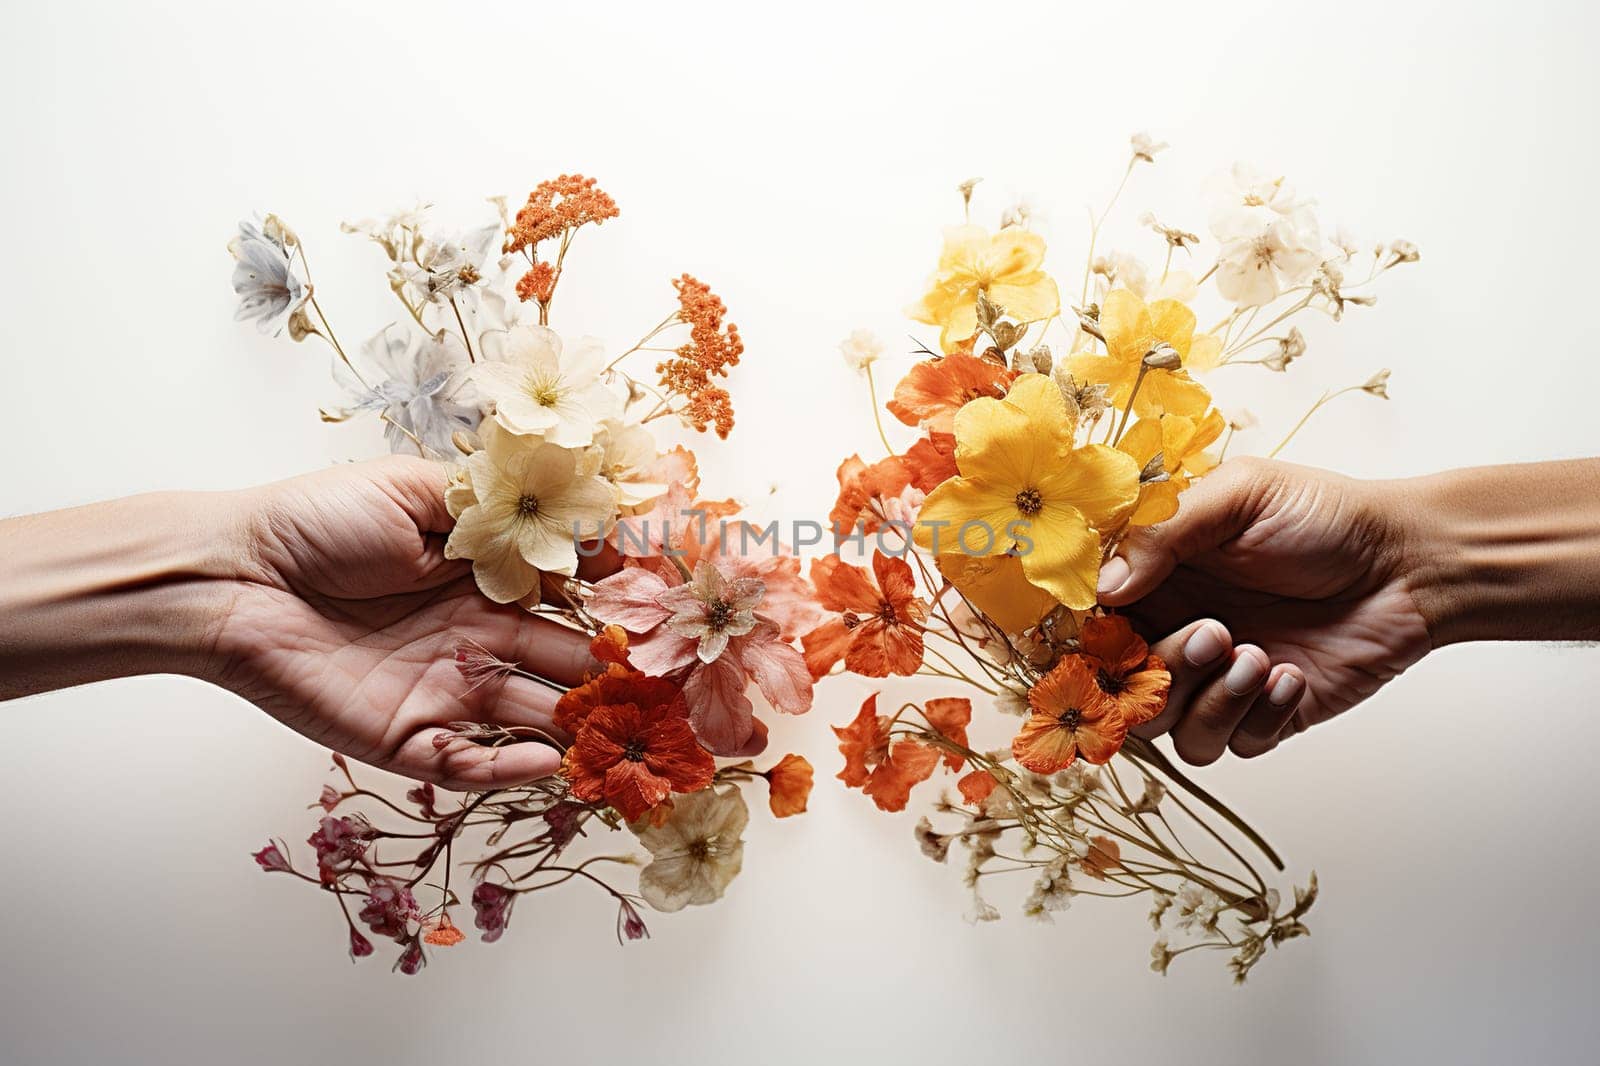 Two hands with flowers reach out to each other.